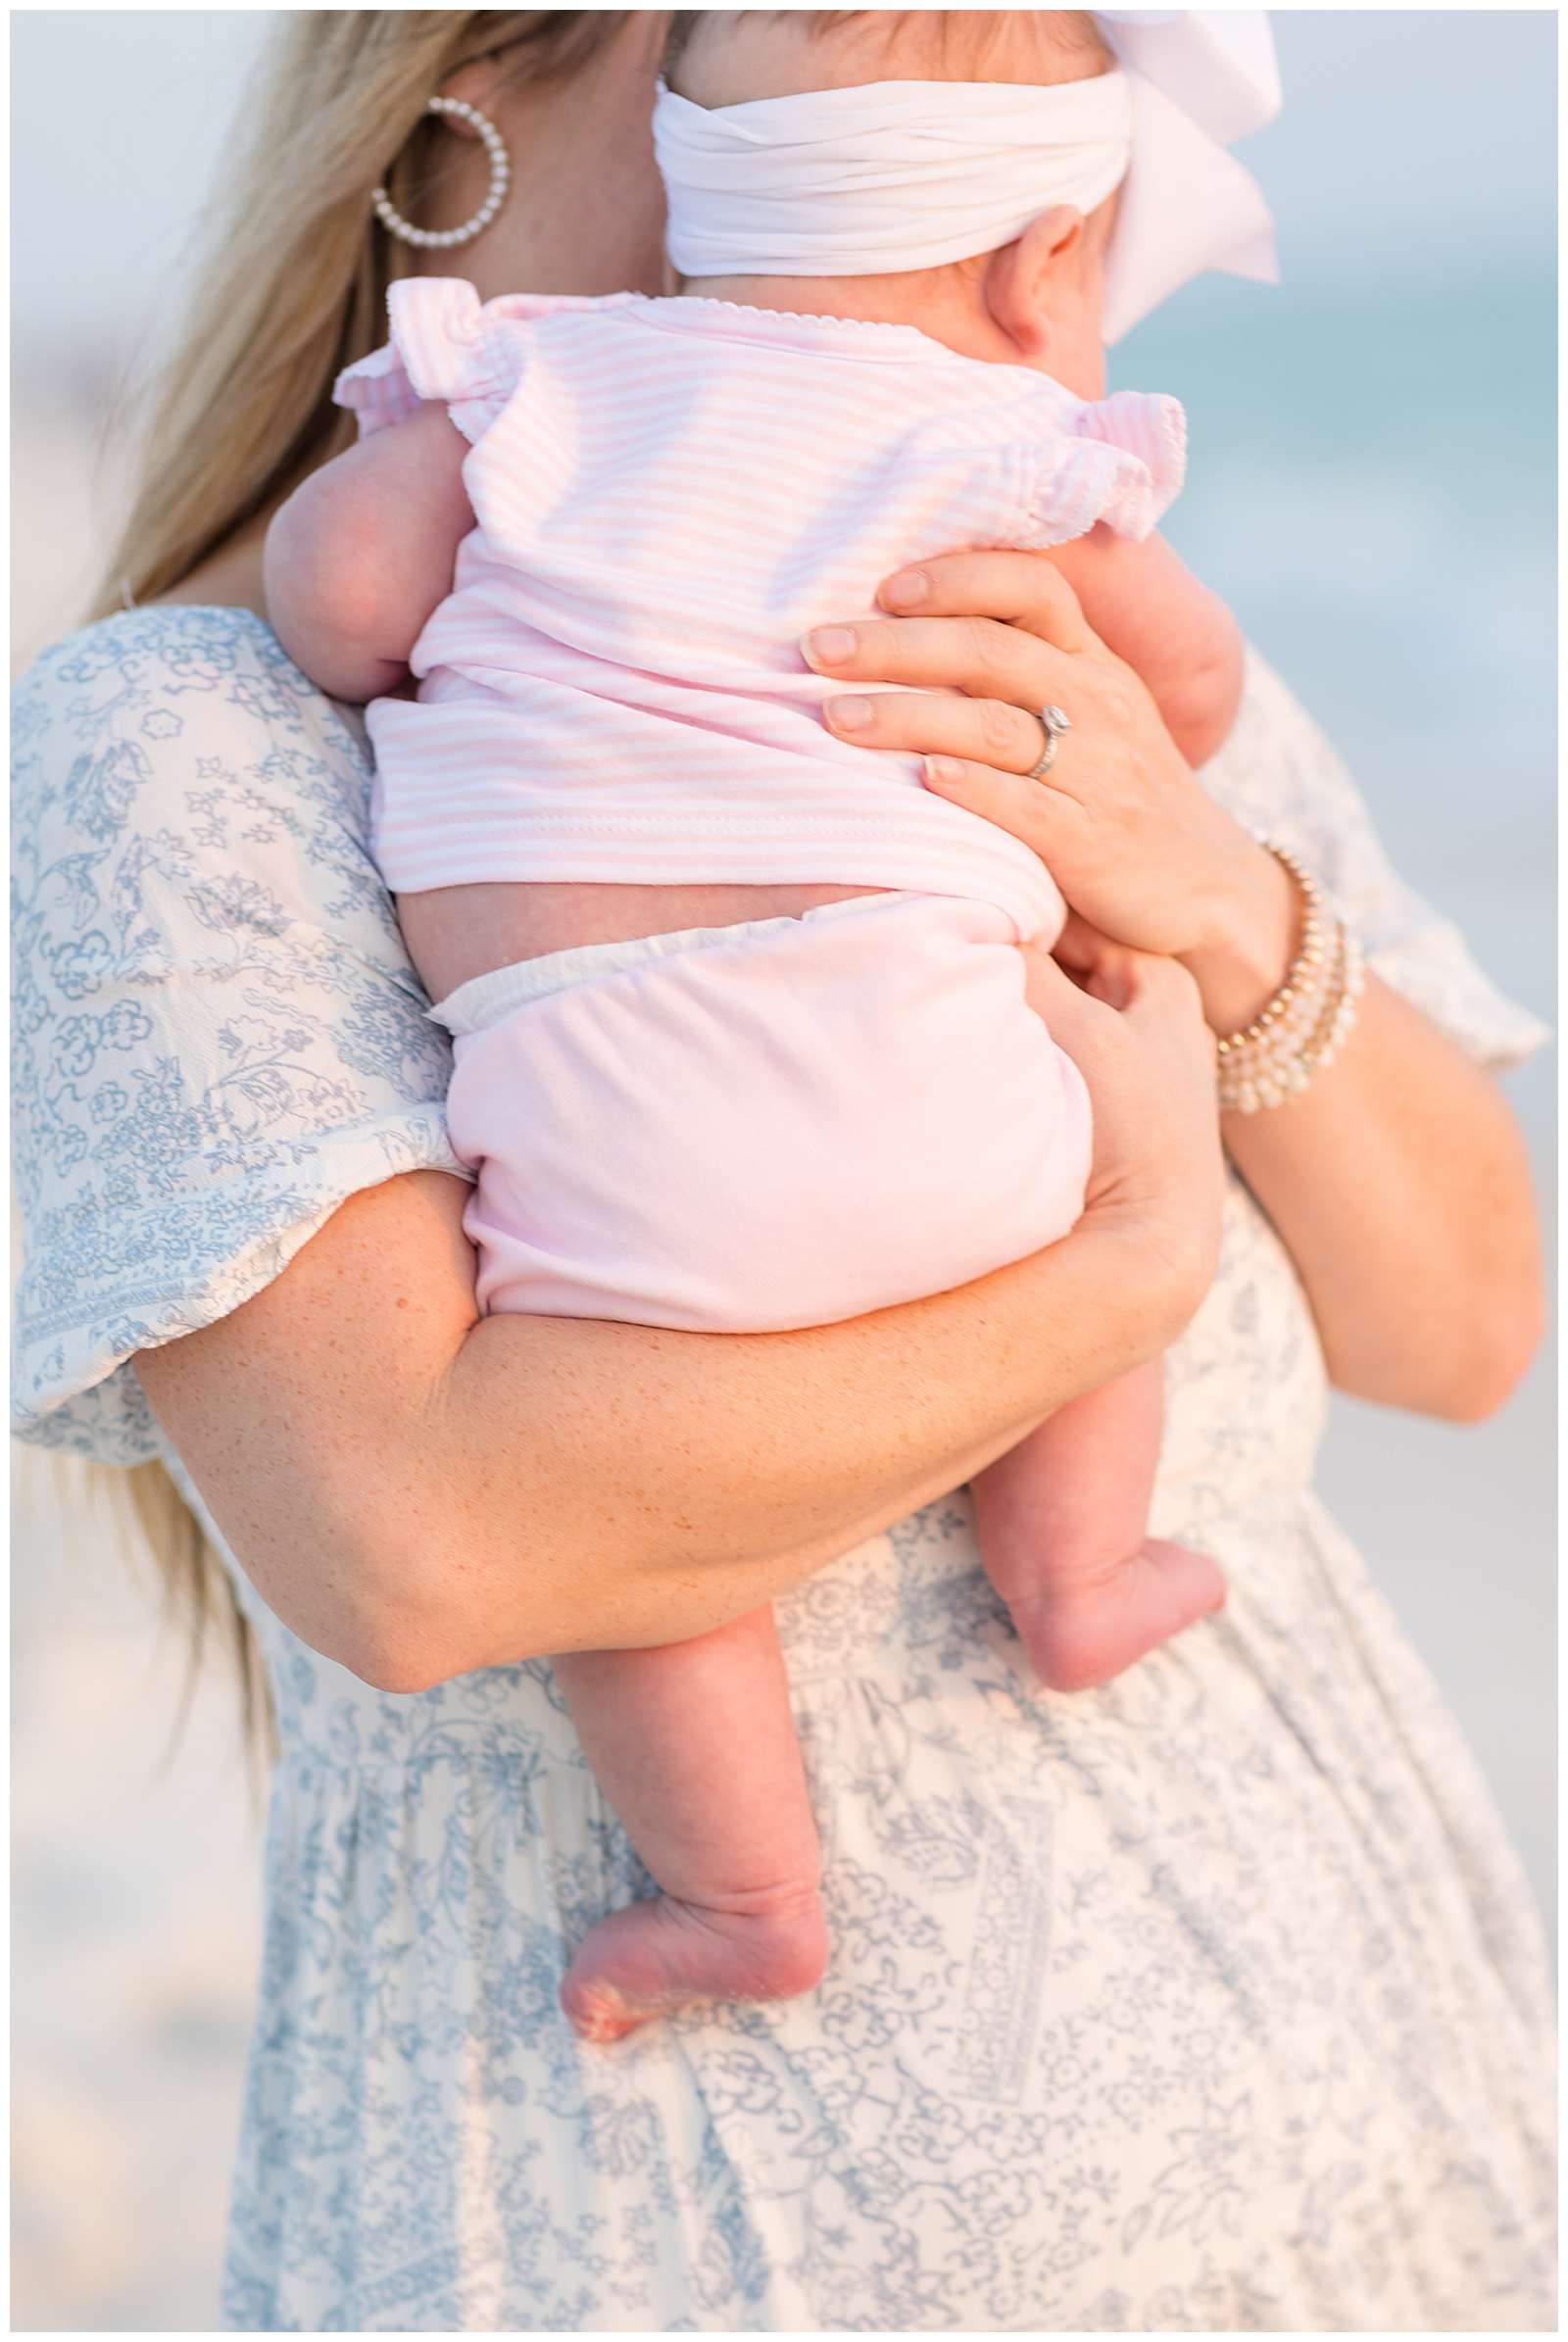 Close-up, detailed image shows the back of baby girl who is wearing a pink and white stripped outfit being held by her mother's arm and hand during their Rosemary Beach family portrait session. - rebeccaricephoto.com